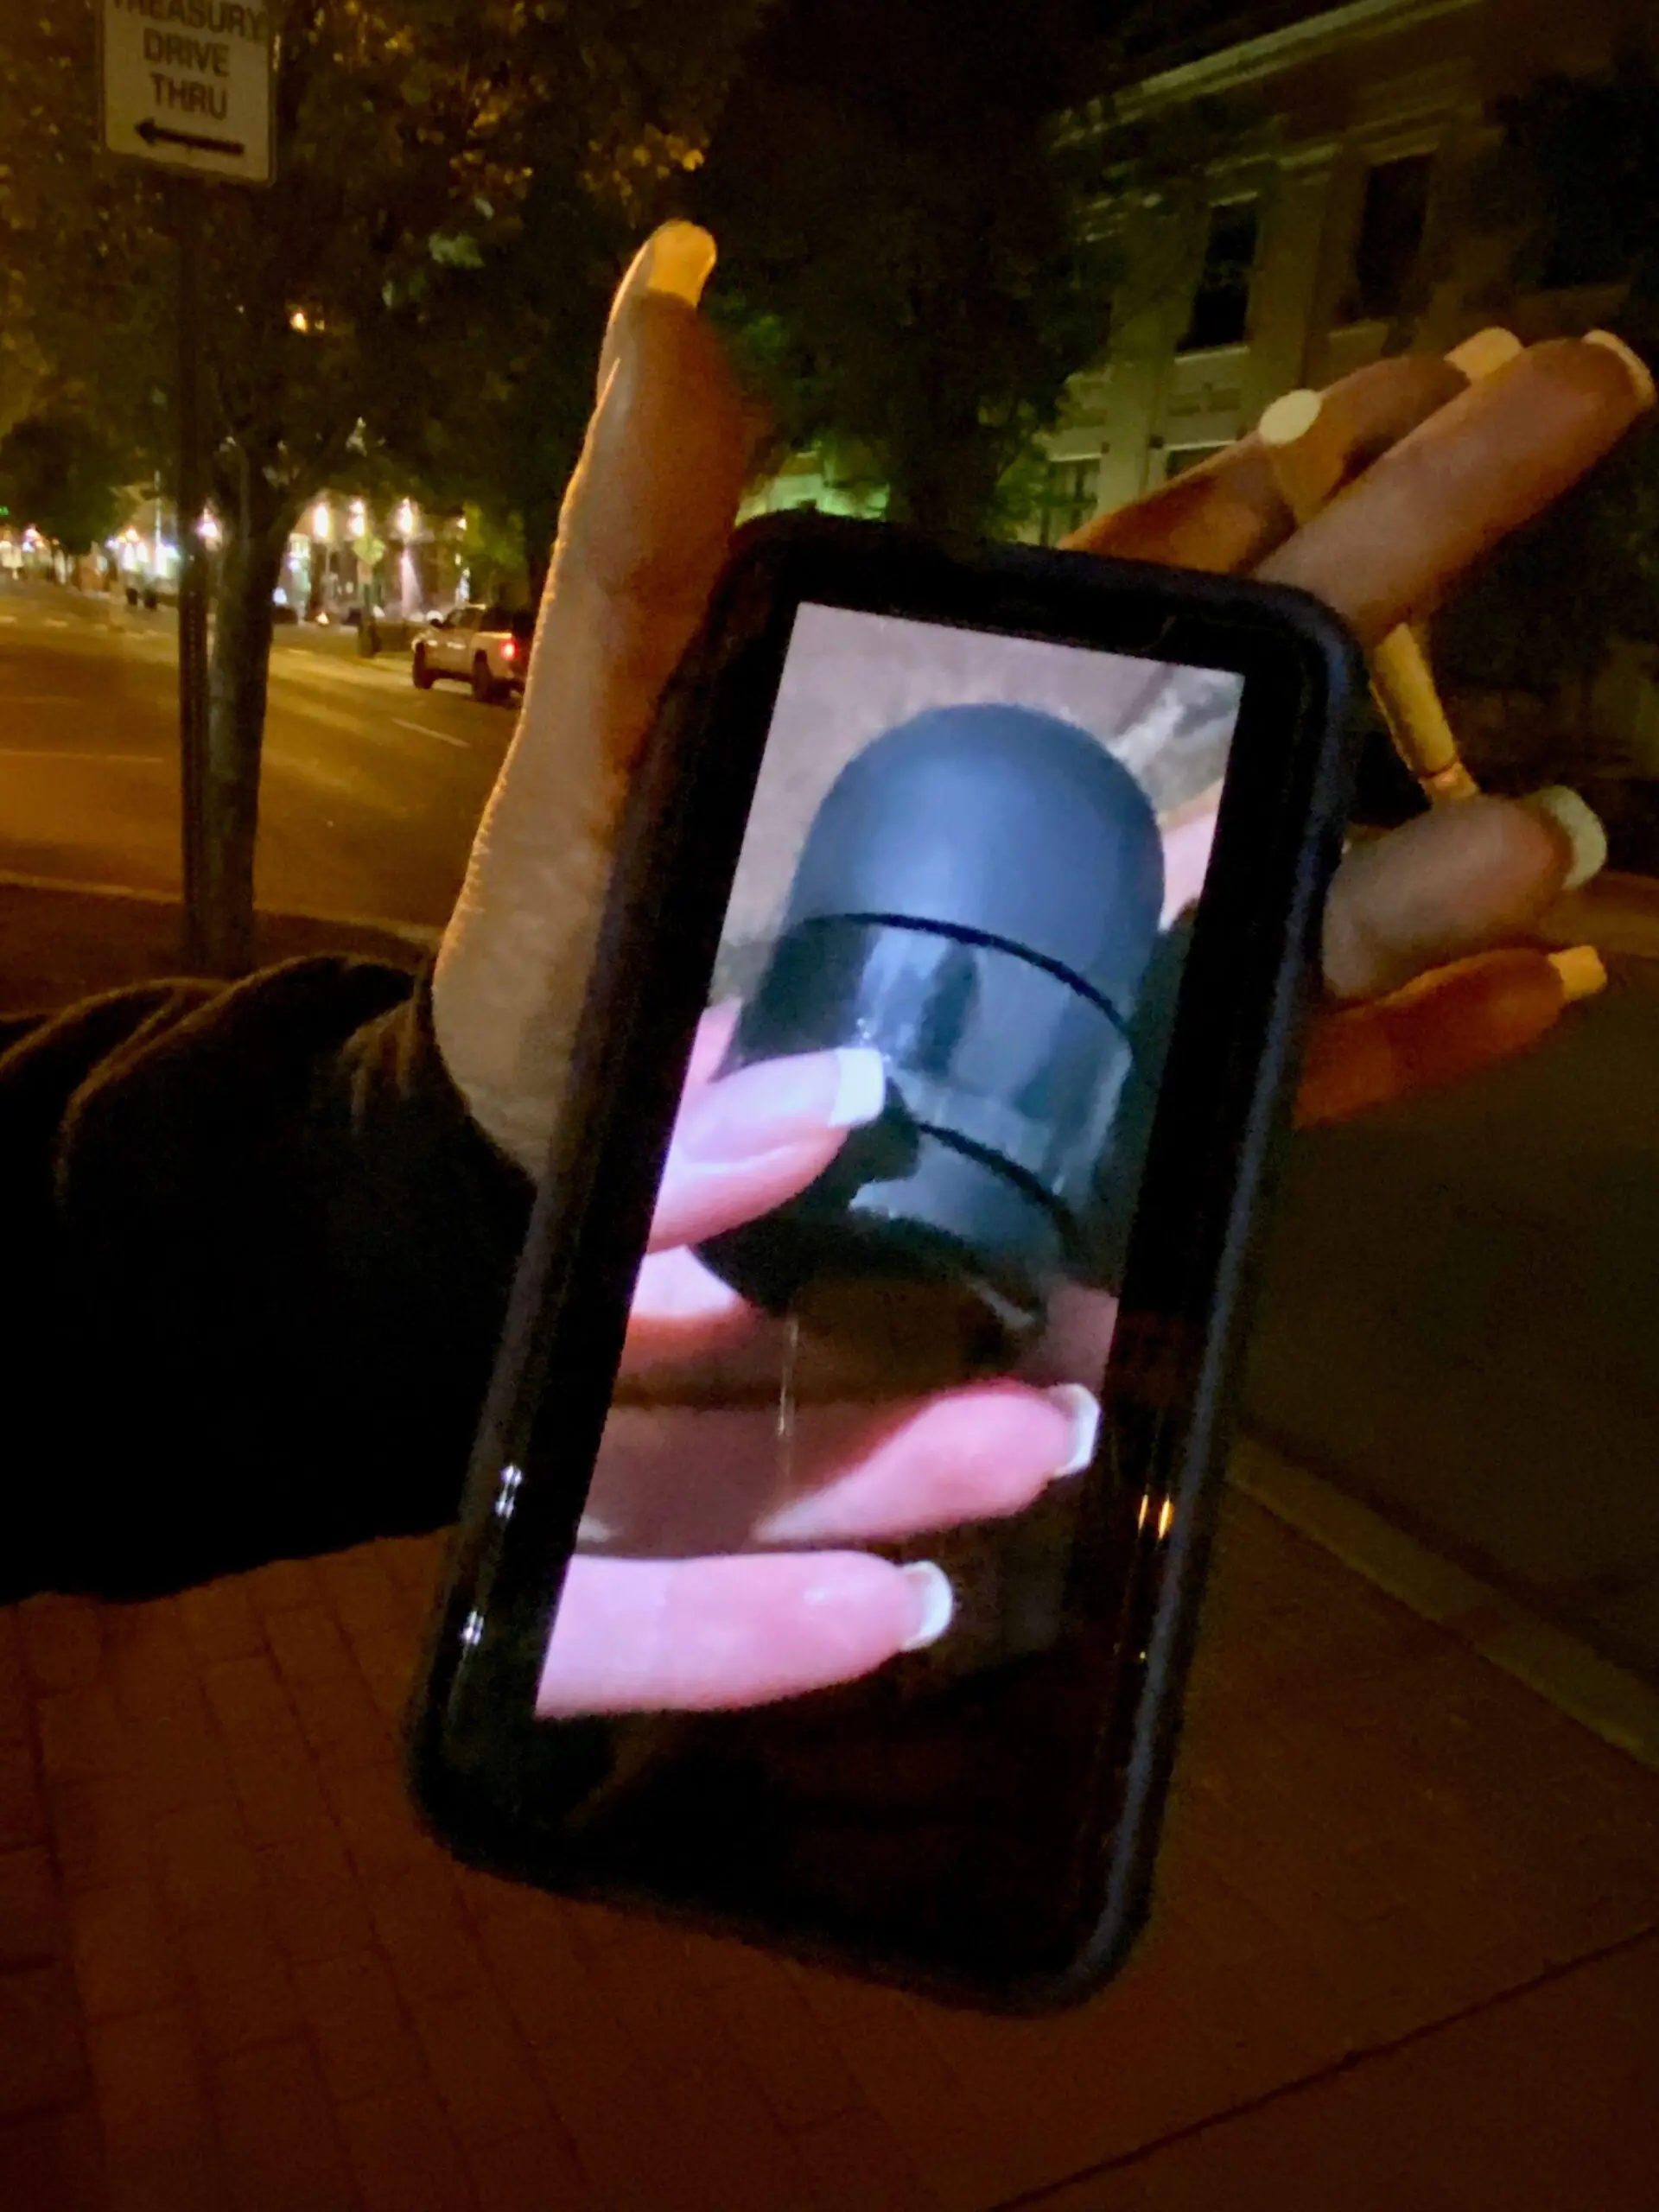 A person holds a mobile phone displaying an image of a hand holding a rubber bullet.